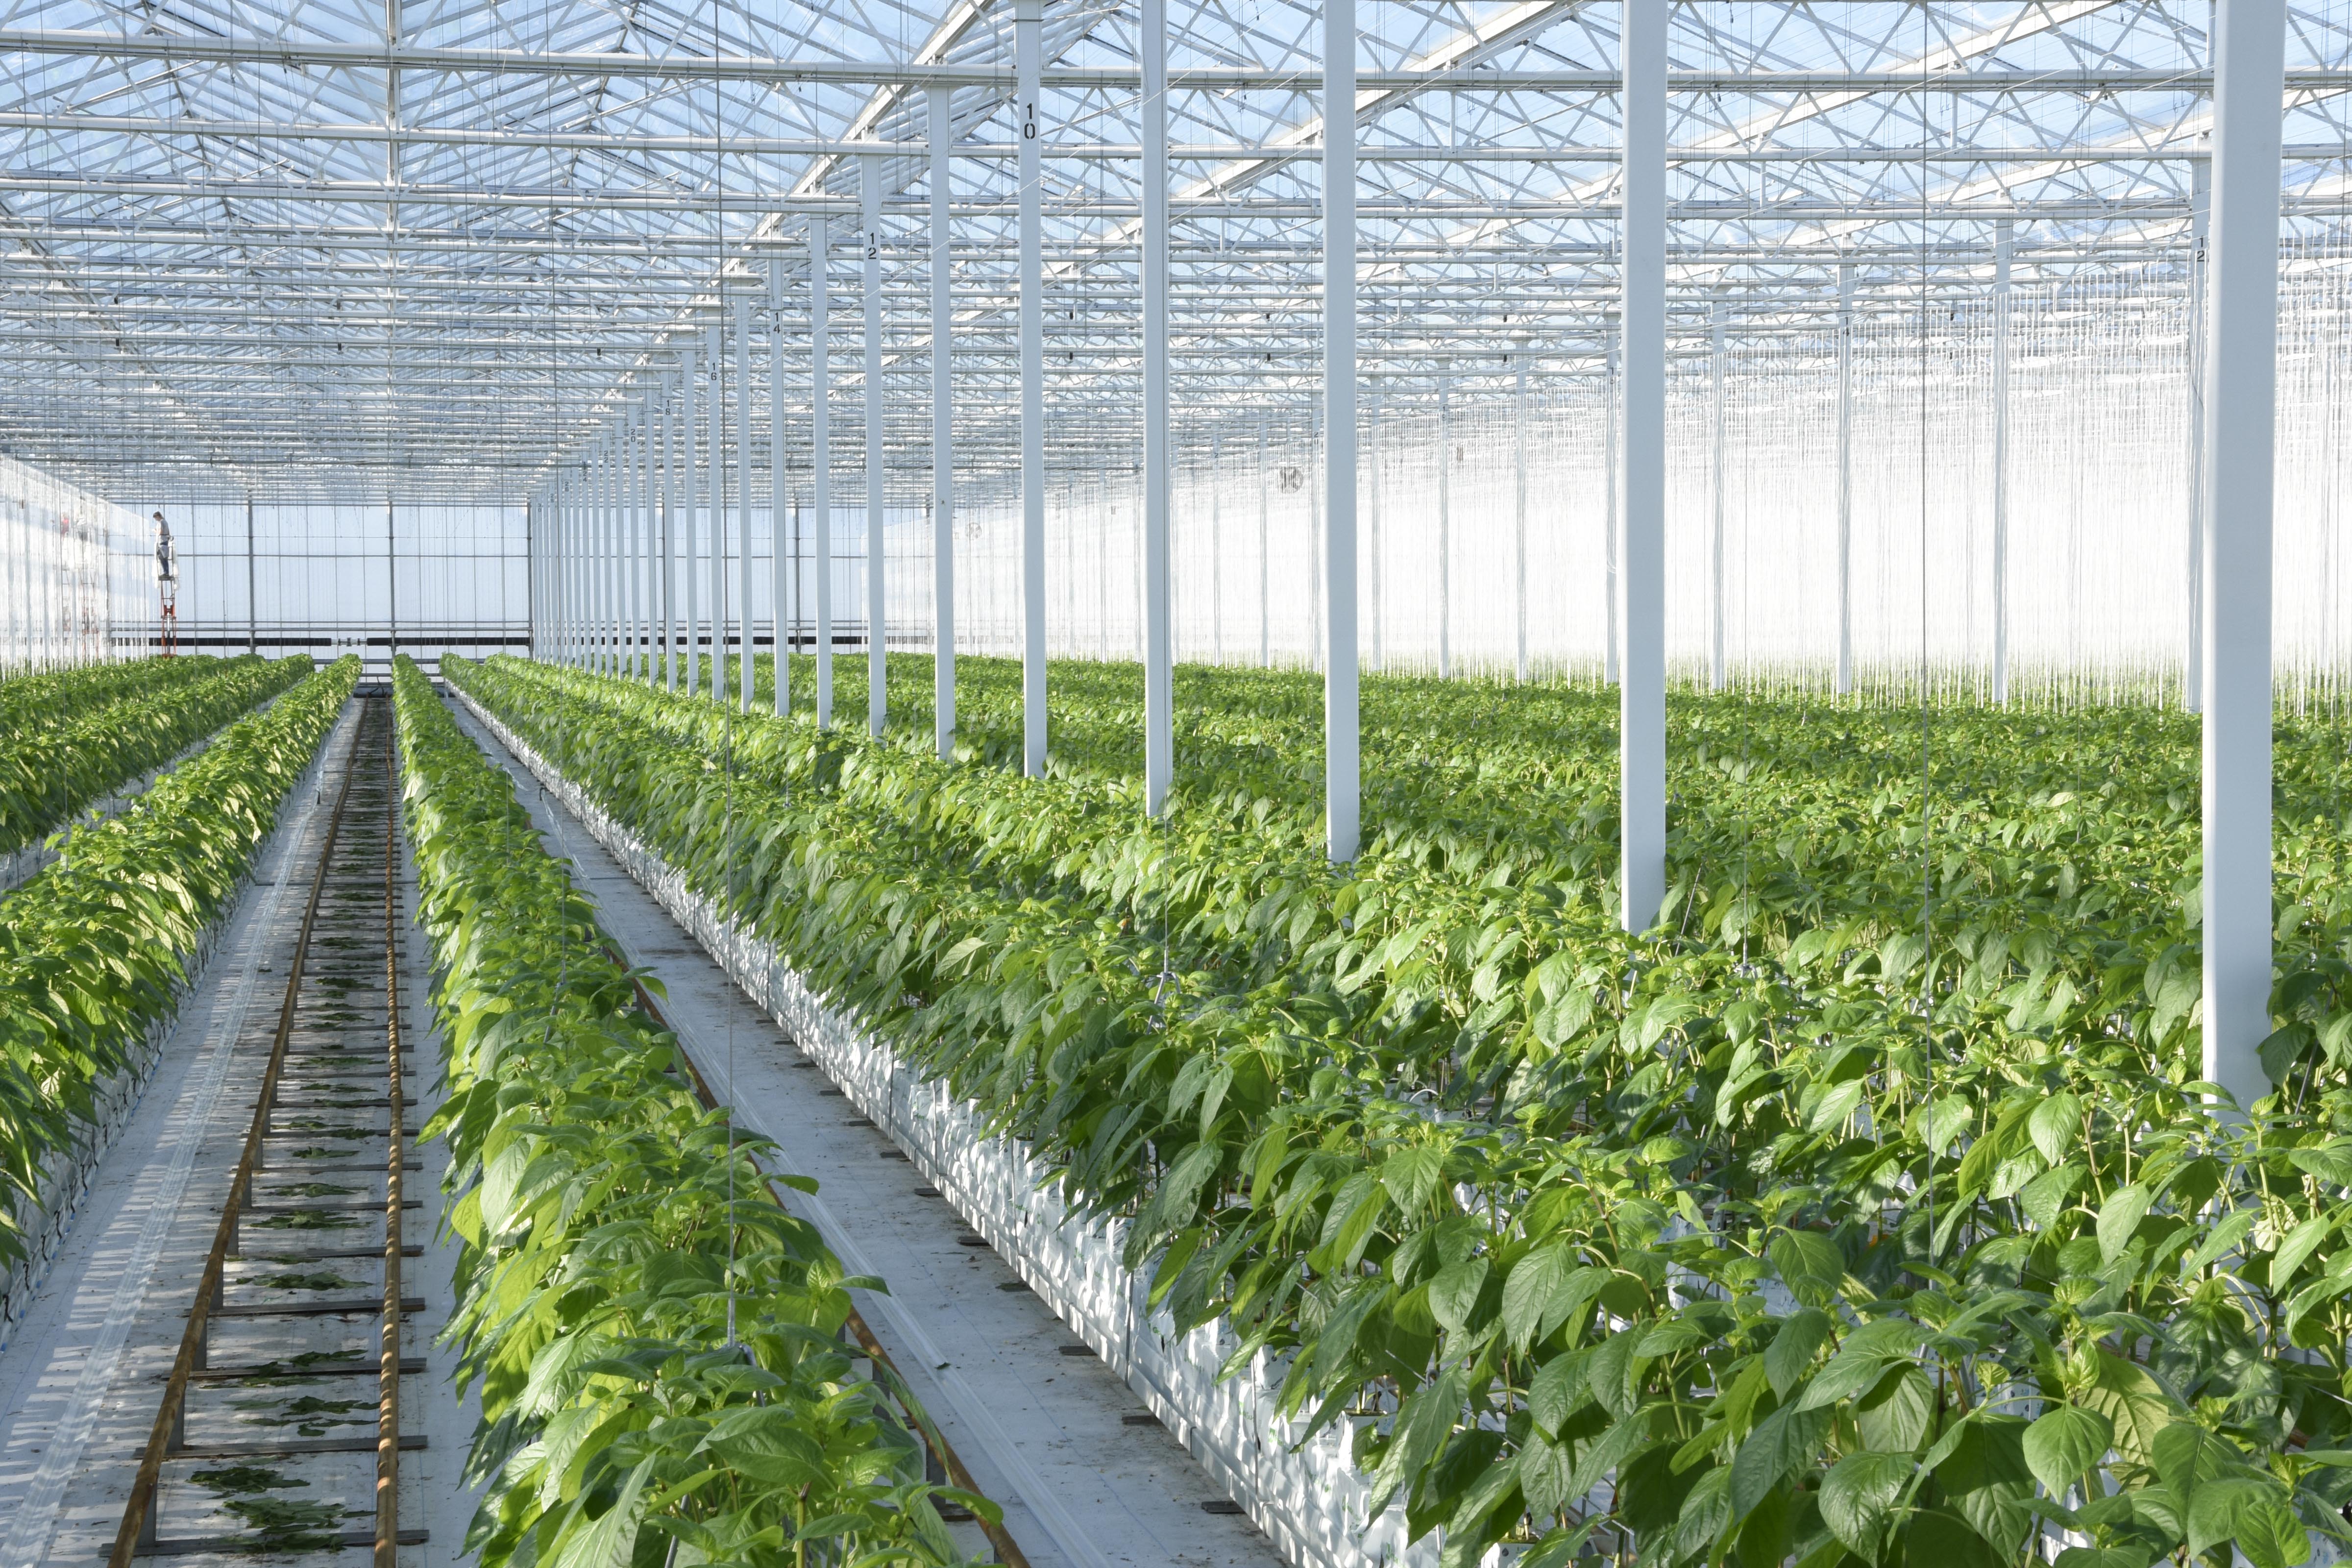 Sweet bell pepper production process by Tangmere Airfield Nurseries